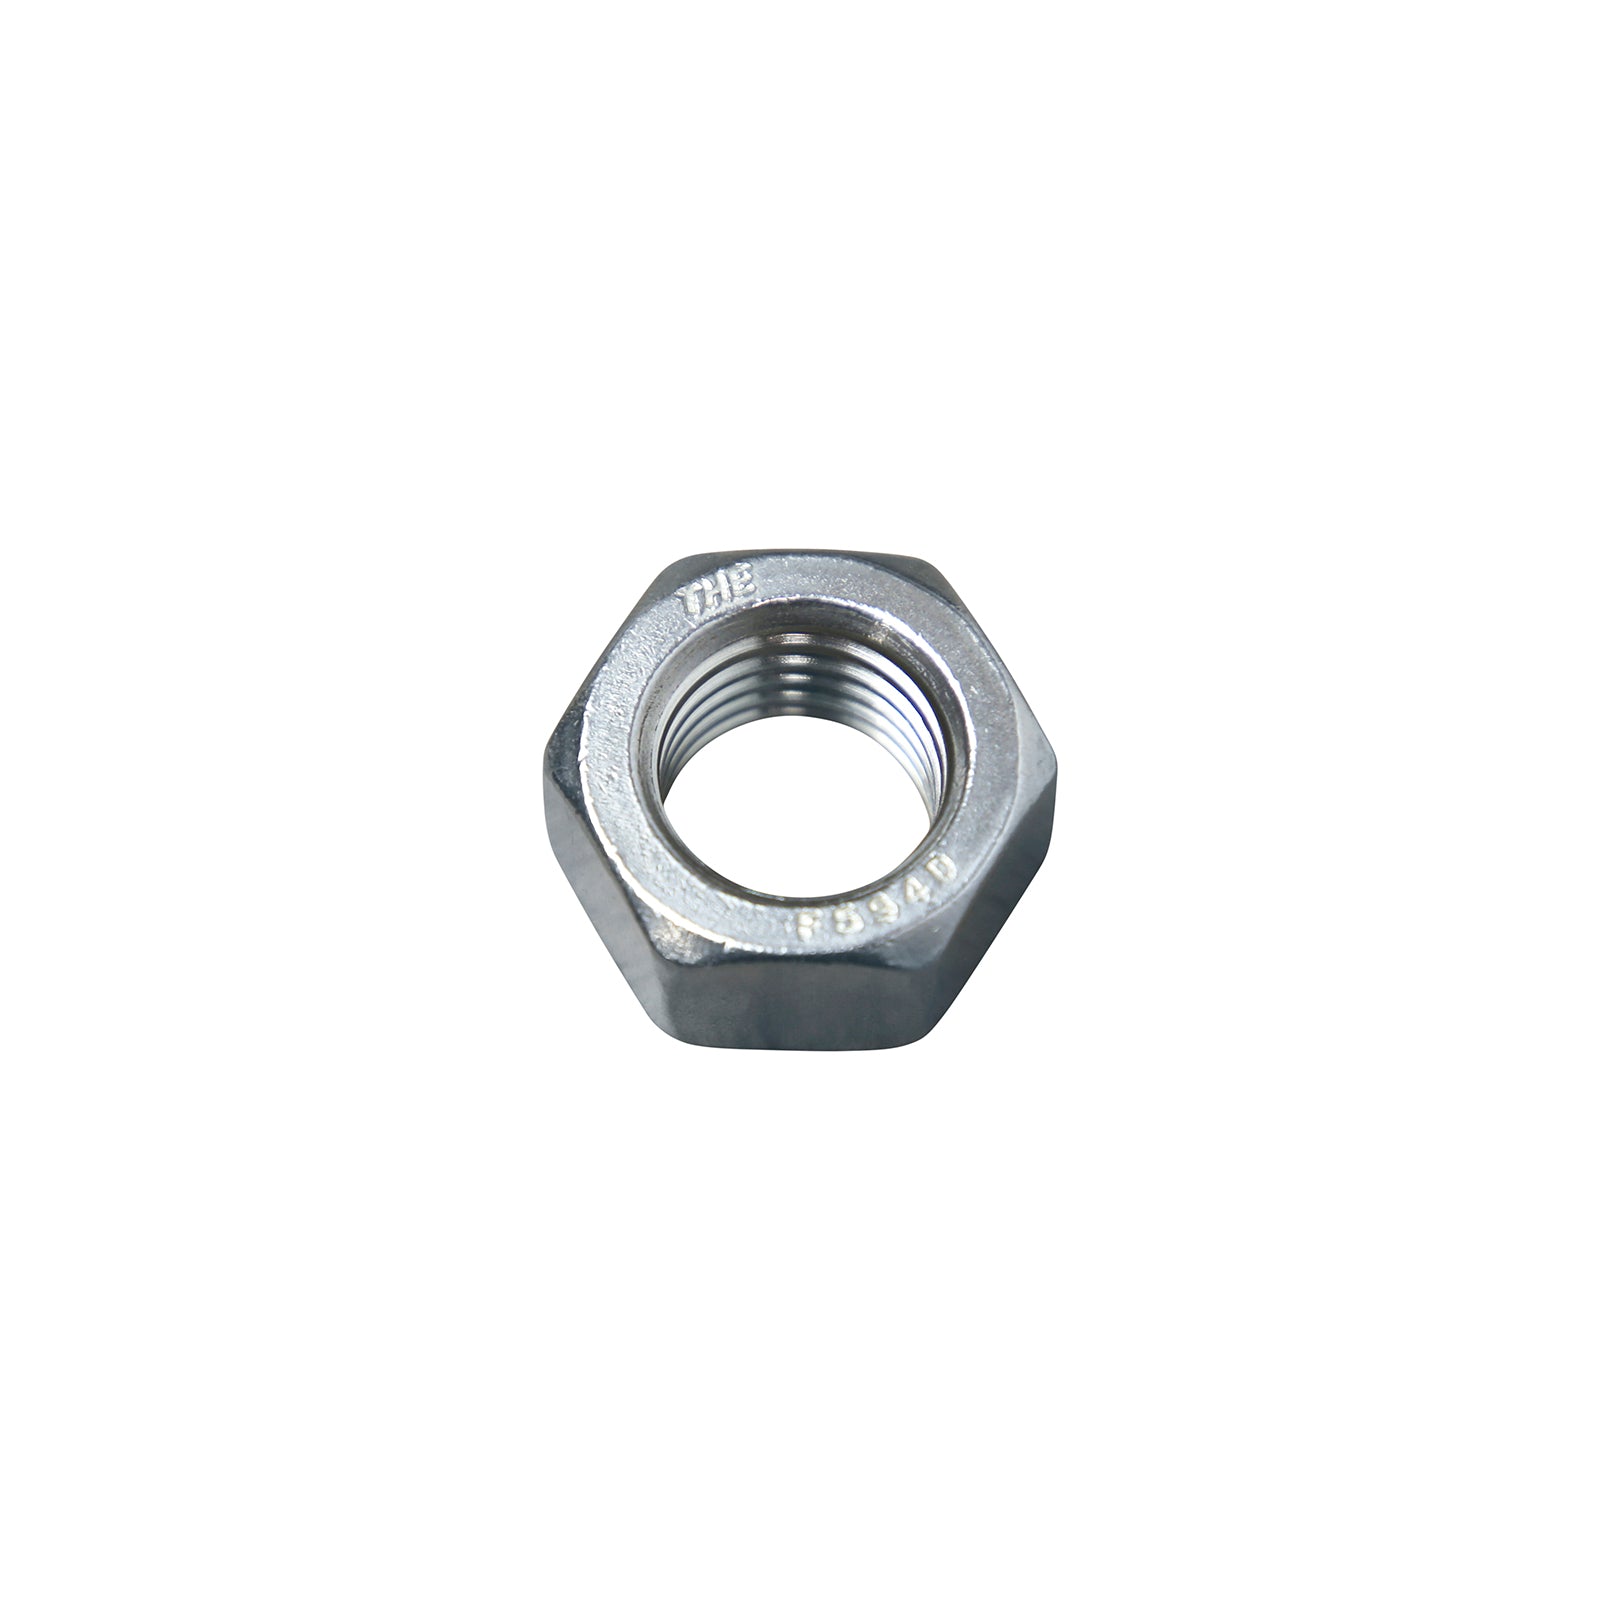 3/4"-10 Conquest Hex Nut - 304 Stainless Steel